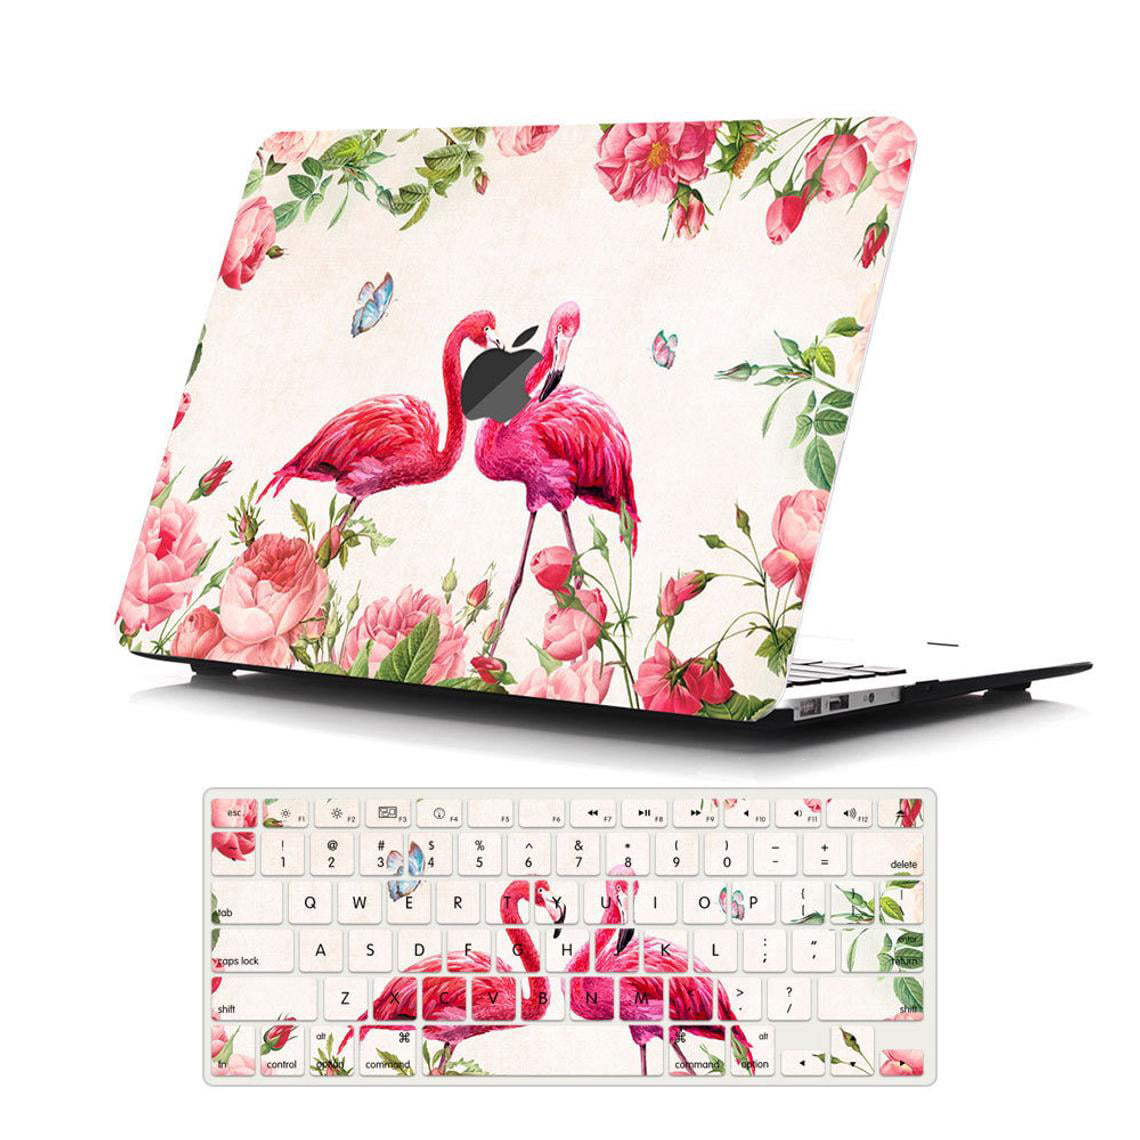 Spring Florals Pink Orange Design Cute Printing Shell Hard Case Rubberized Cover for MacBook Air 13 M1 Pro 2020 Pro 16 15 Air 11 12 Laptops